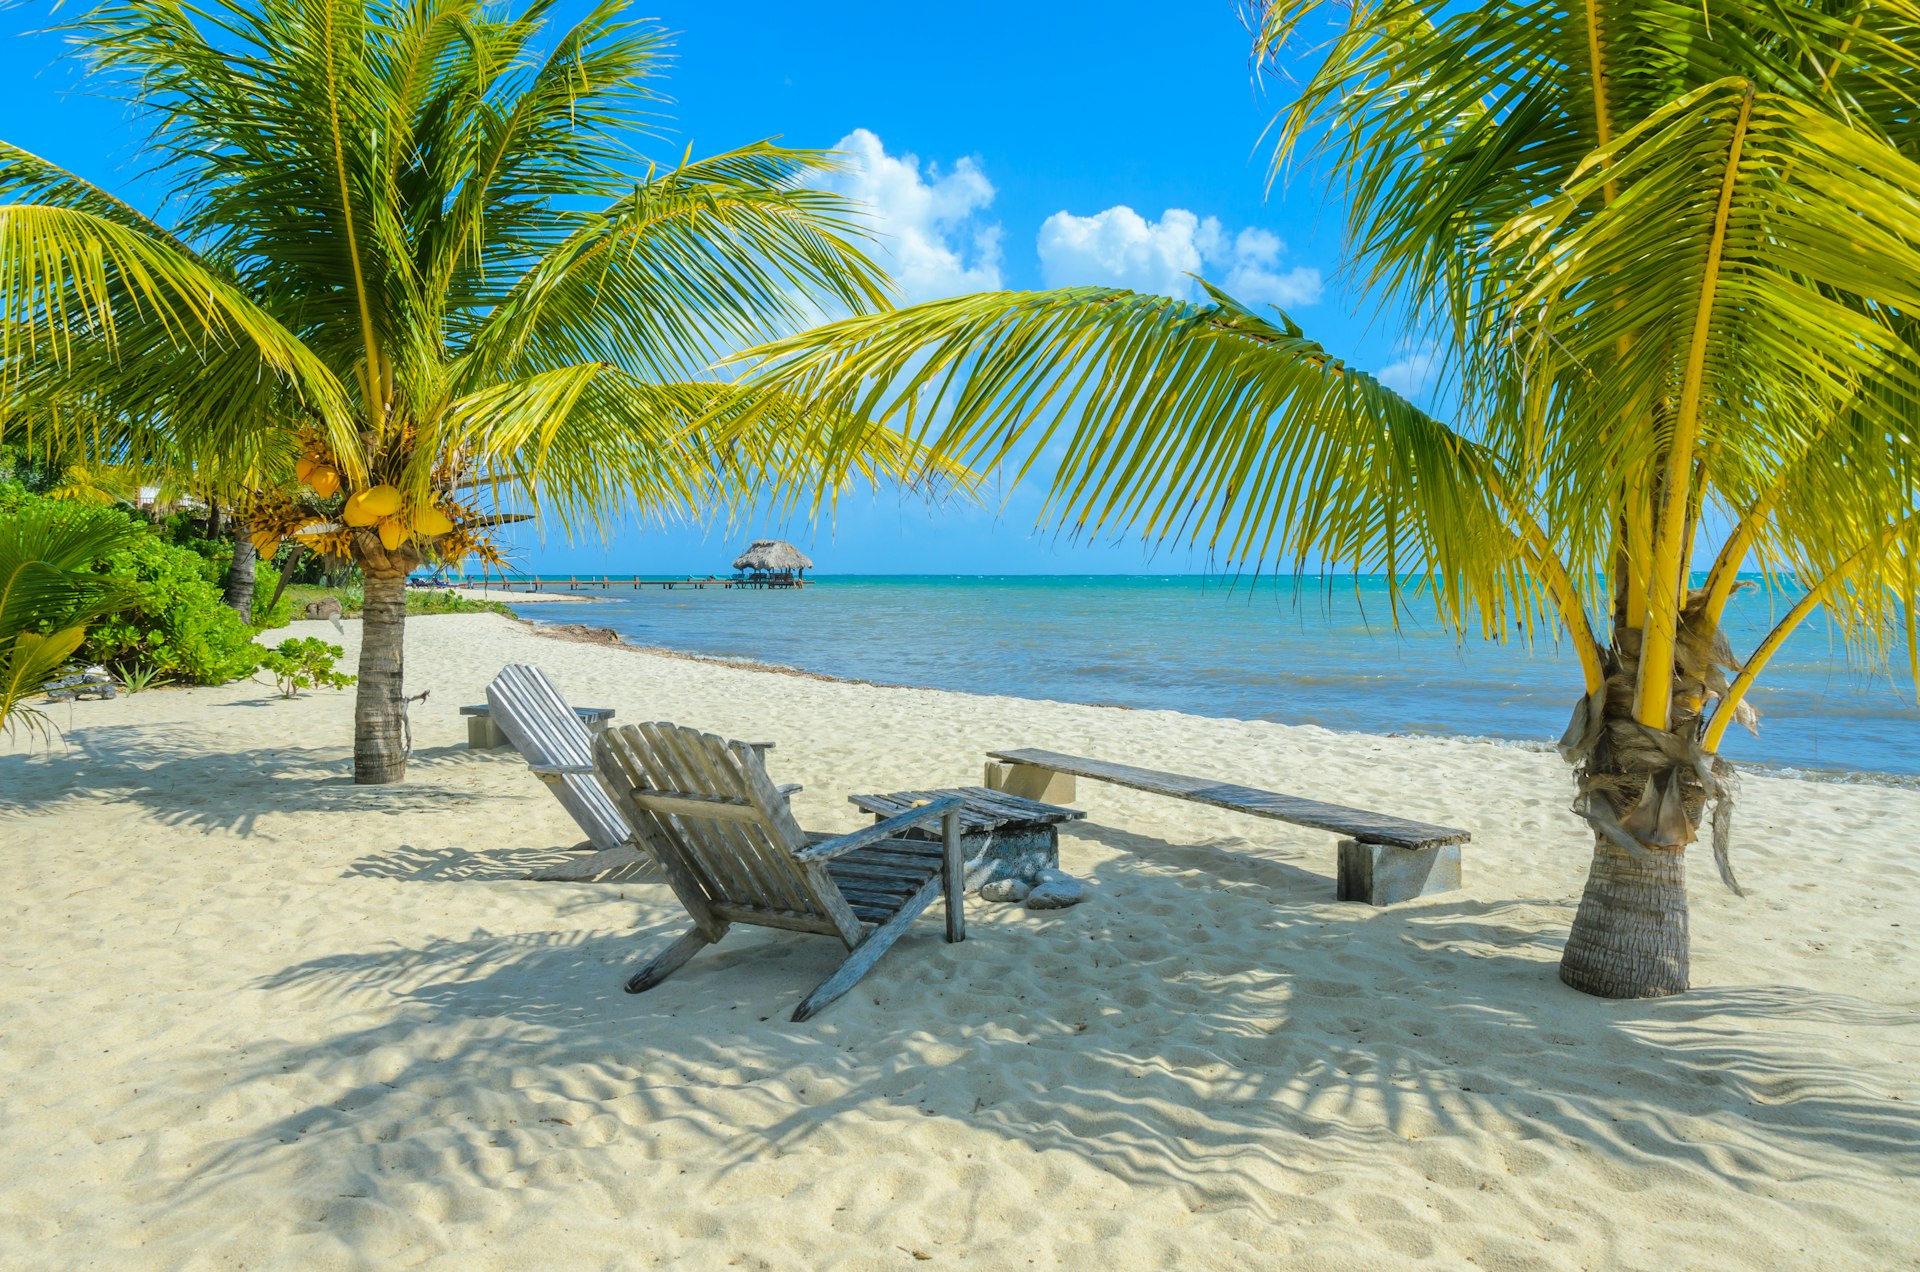 Paradise beach in Placencia, Belize, Central America